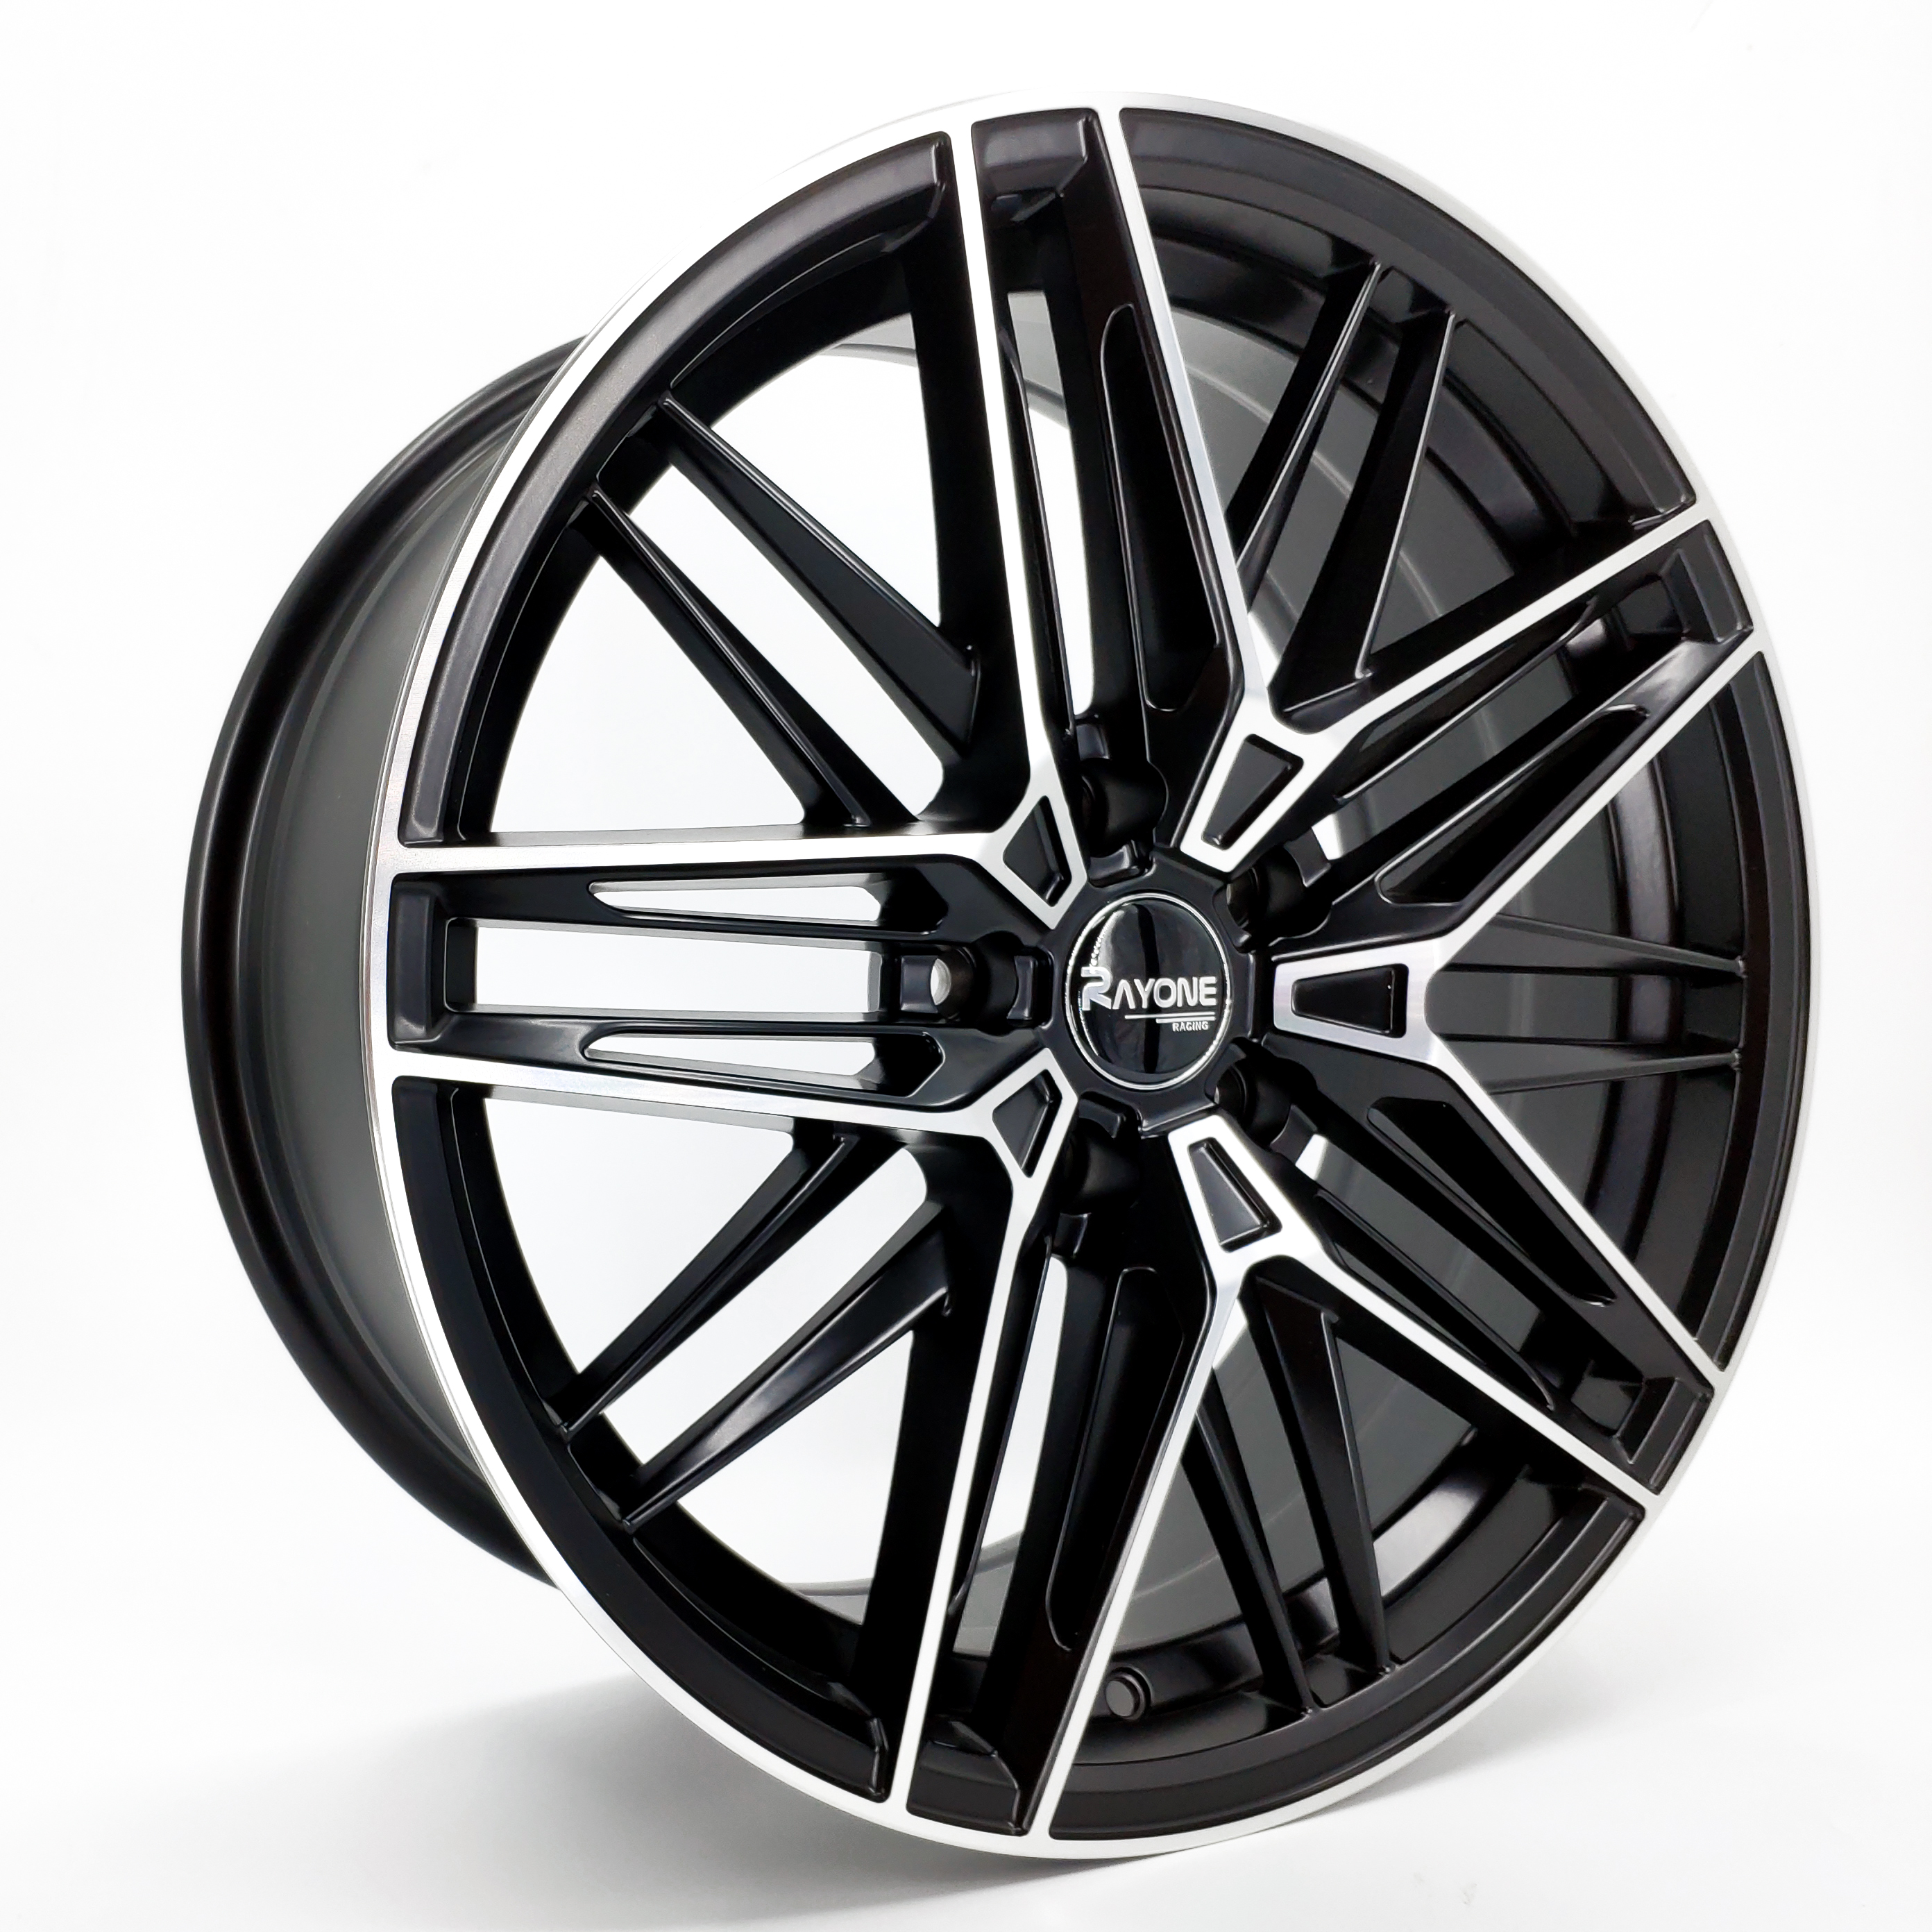 2021 wholesale price Forged Black Wheels - Rayone Mesh Design 18inch Aftermarket Wheels For Racing – Rayone